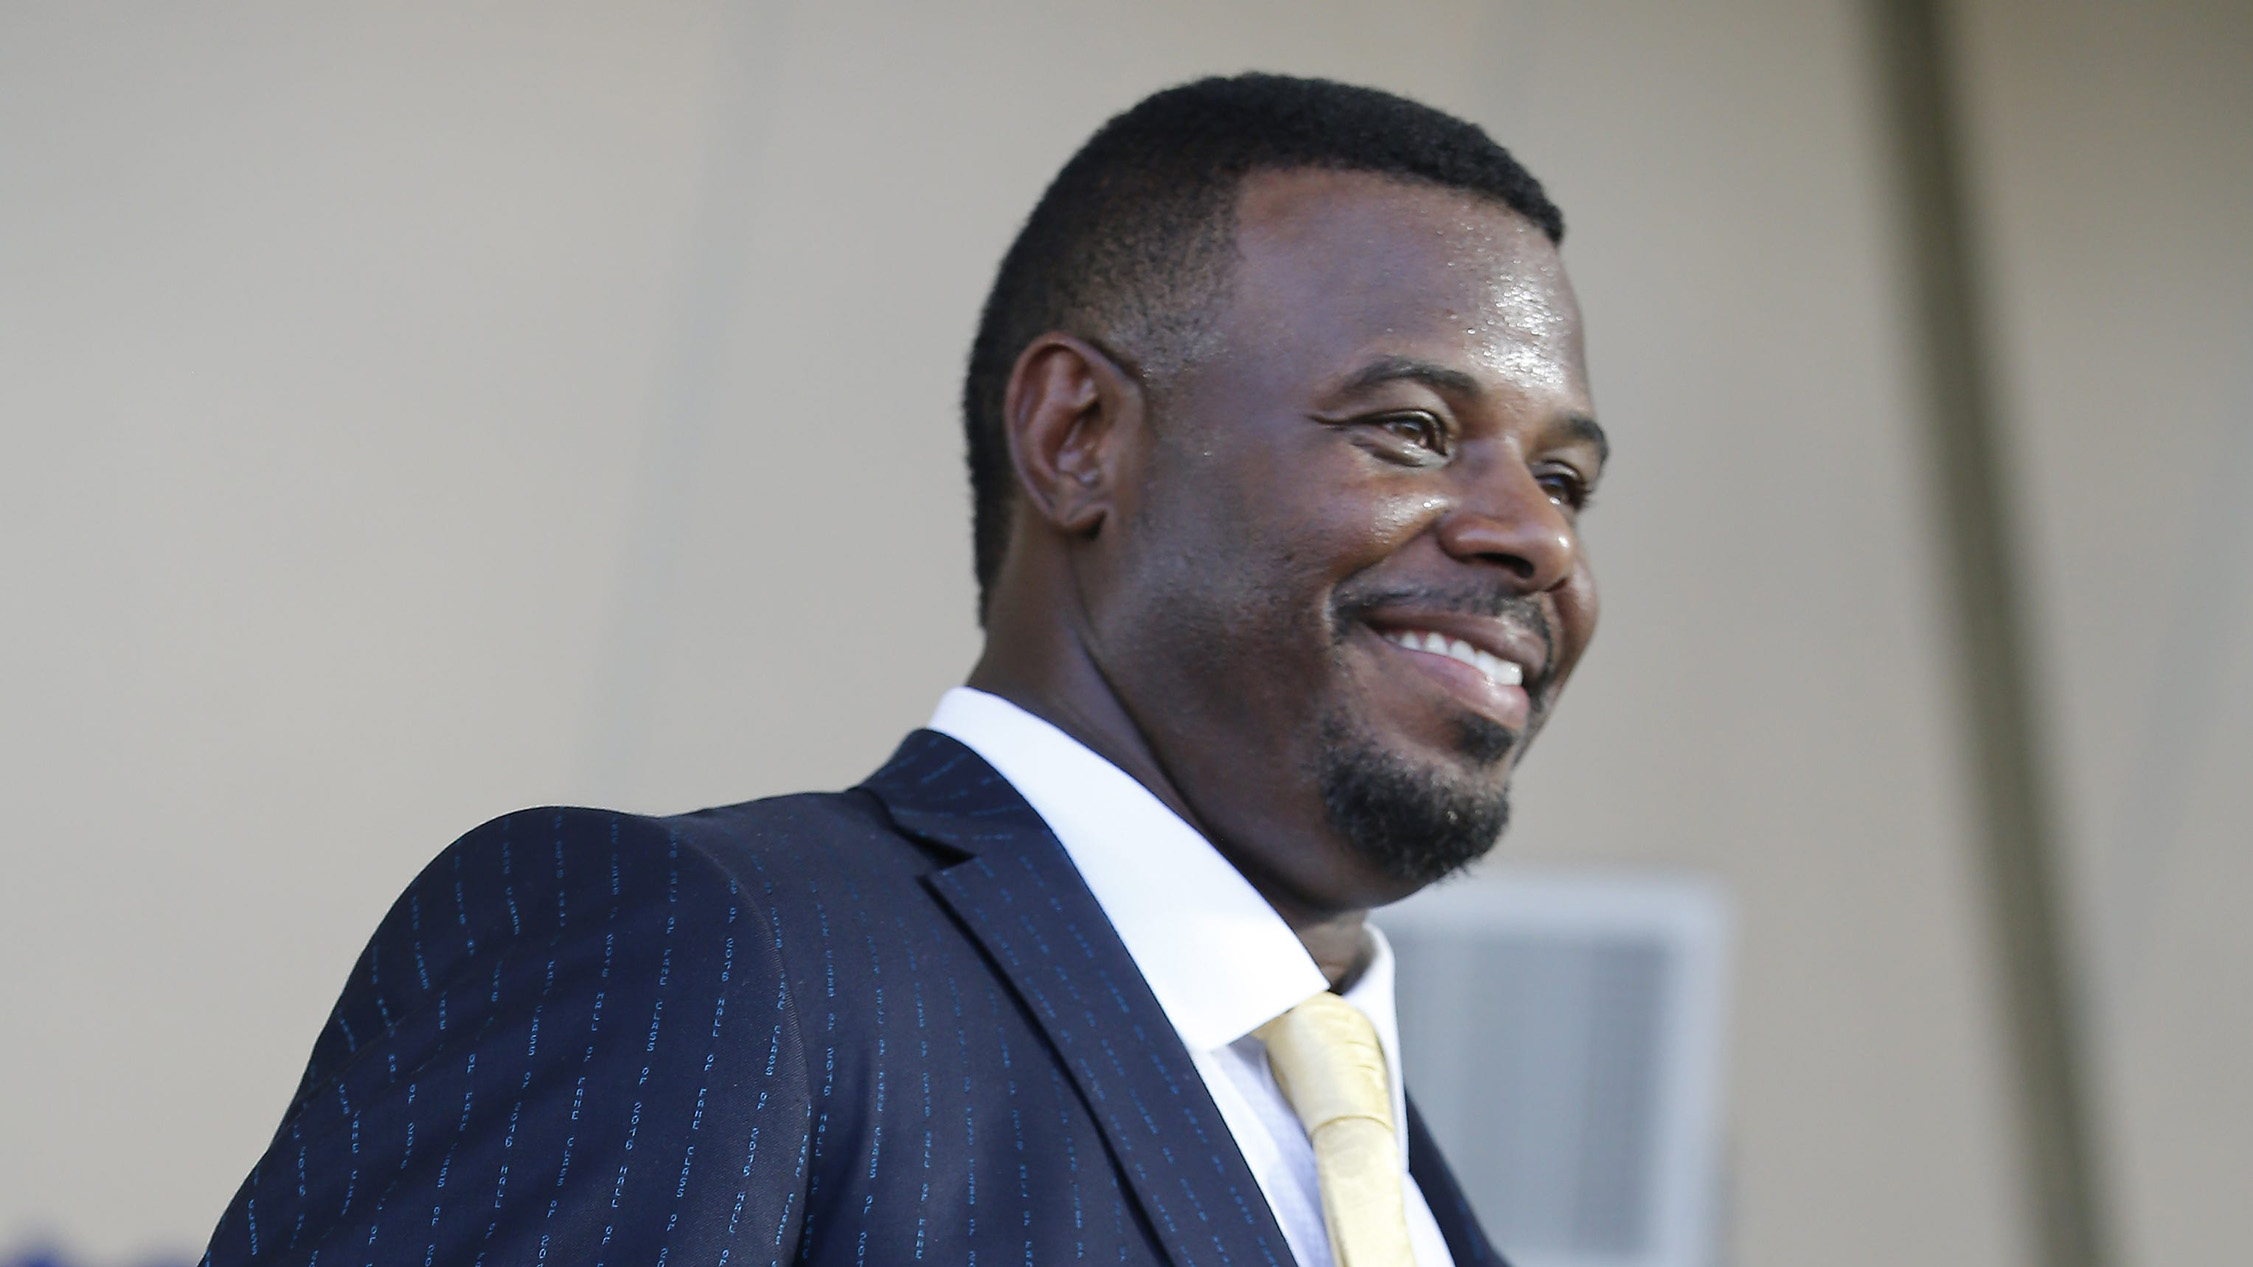 Ken Griffey Jr. is the 3rd highest paid member on the 2023 Reds